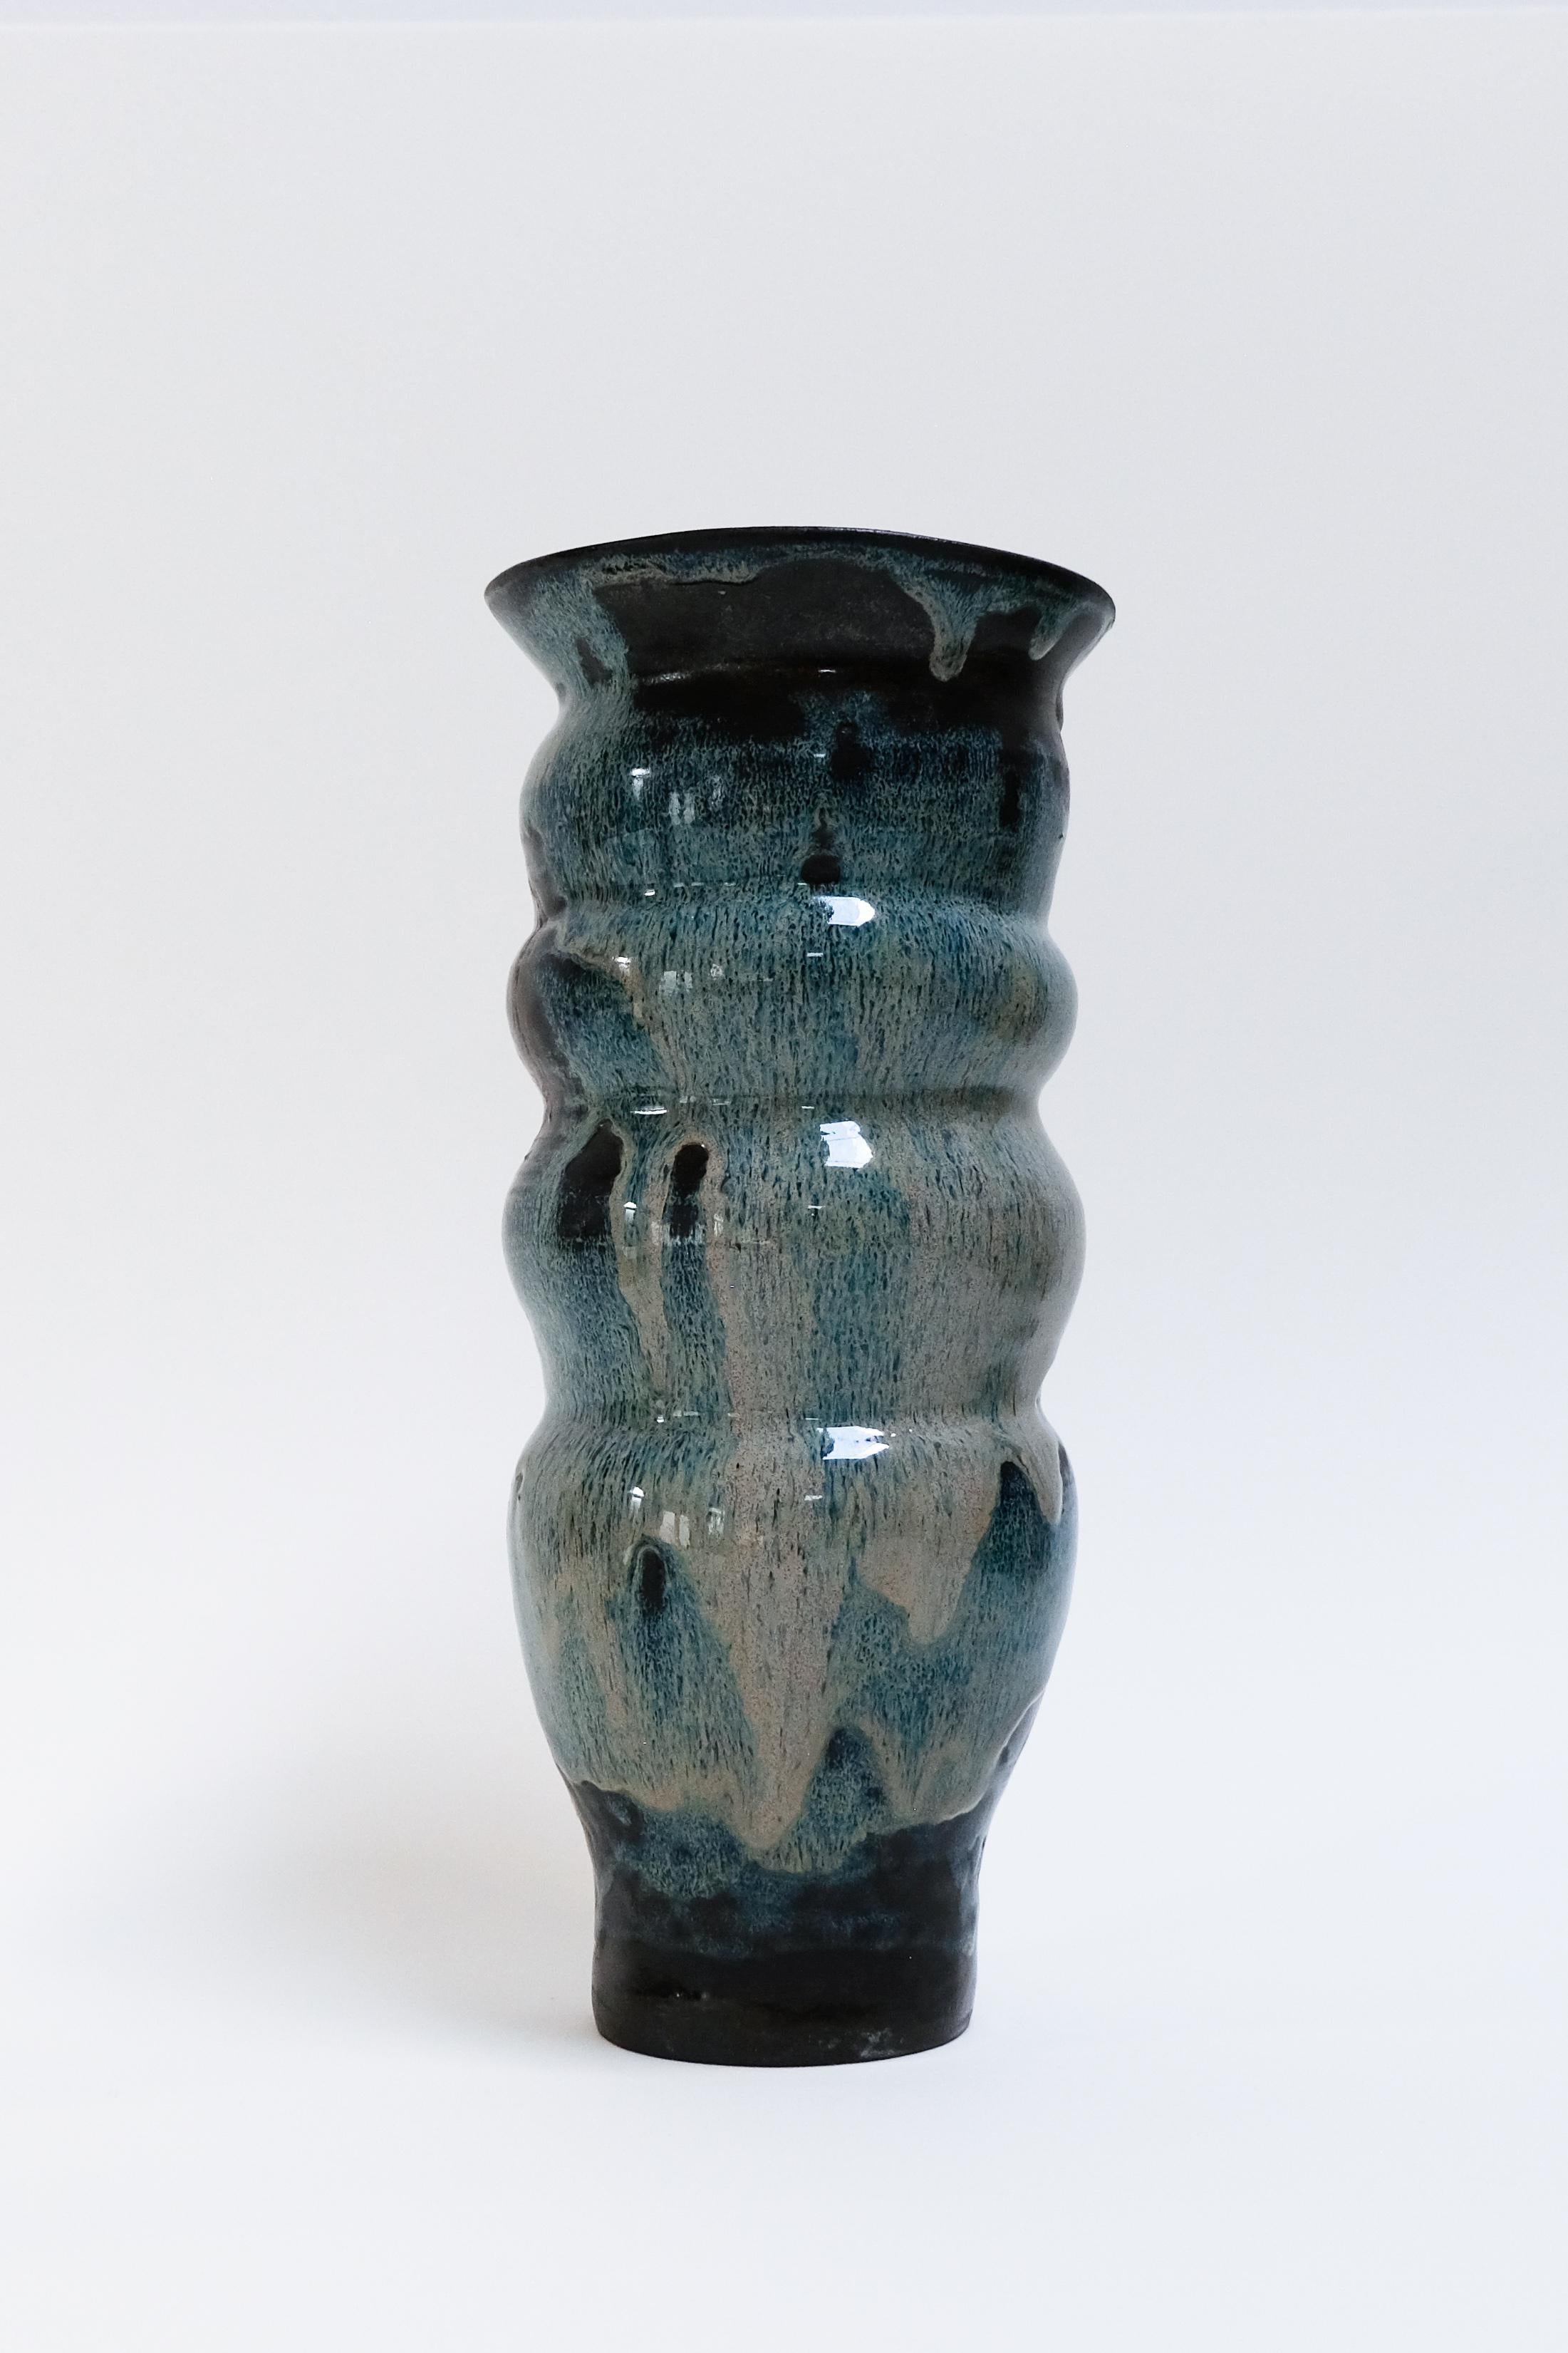 This cool blue contemporary botanical ceramic vase made of black clay is an original artwork by Canadian artist Misbah Ahmed. This piece from her collection of Mur vessels explores organic feminine forms with clay. Mur - meaning curve - uses a